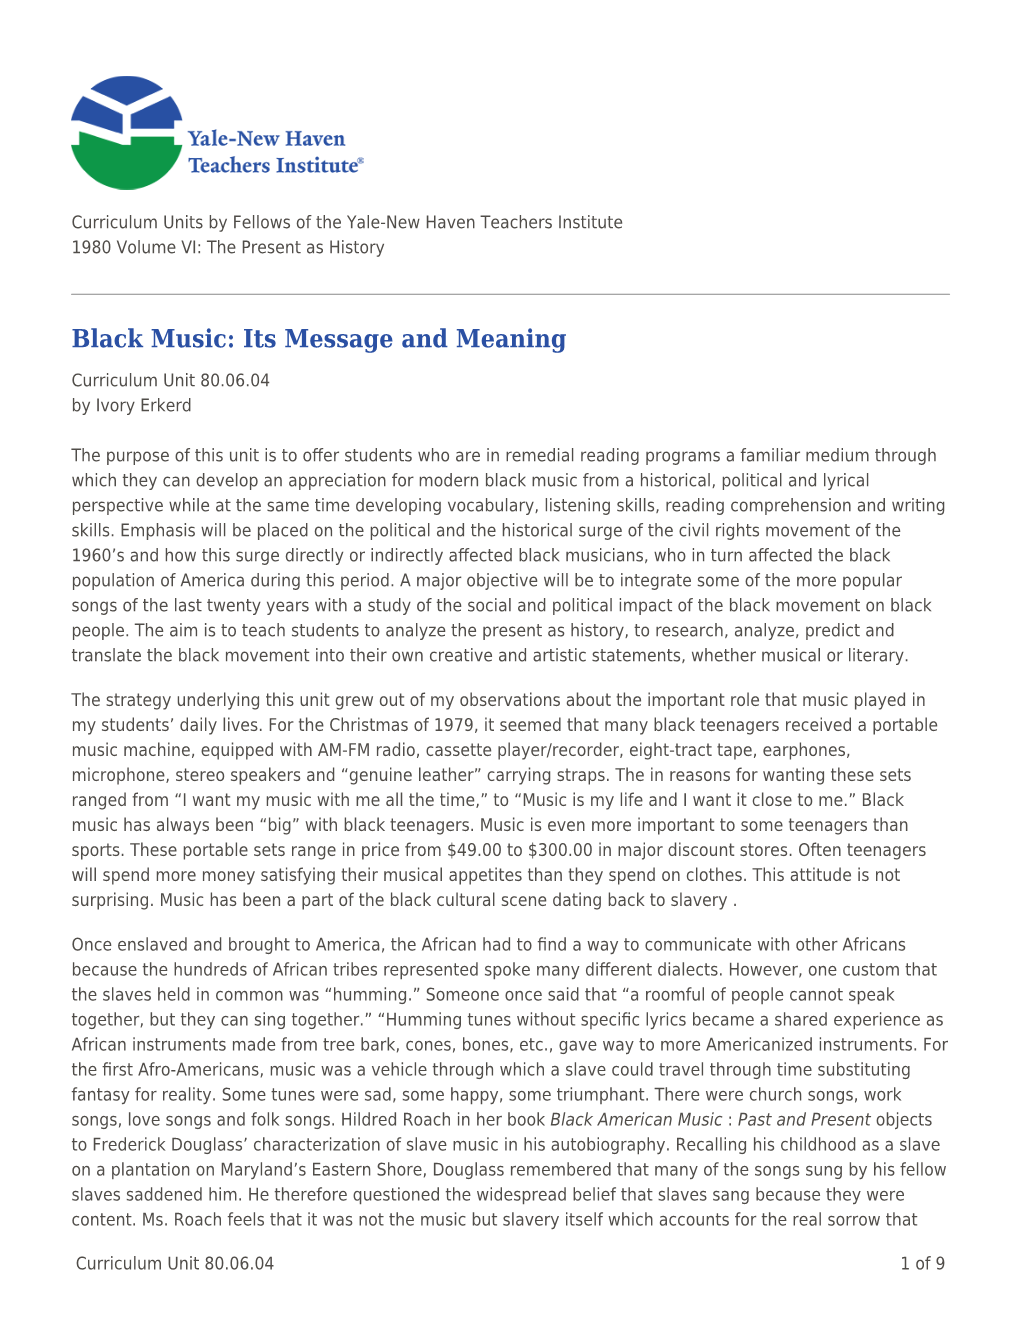 Black Music: Its Message and Meaning